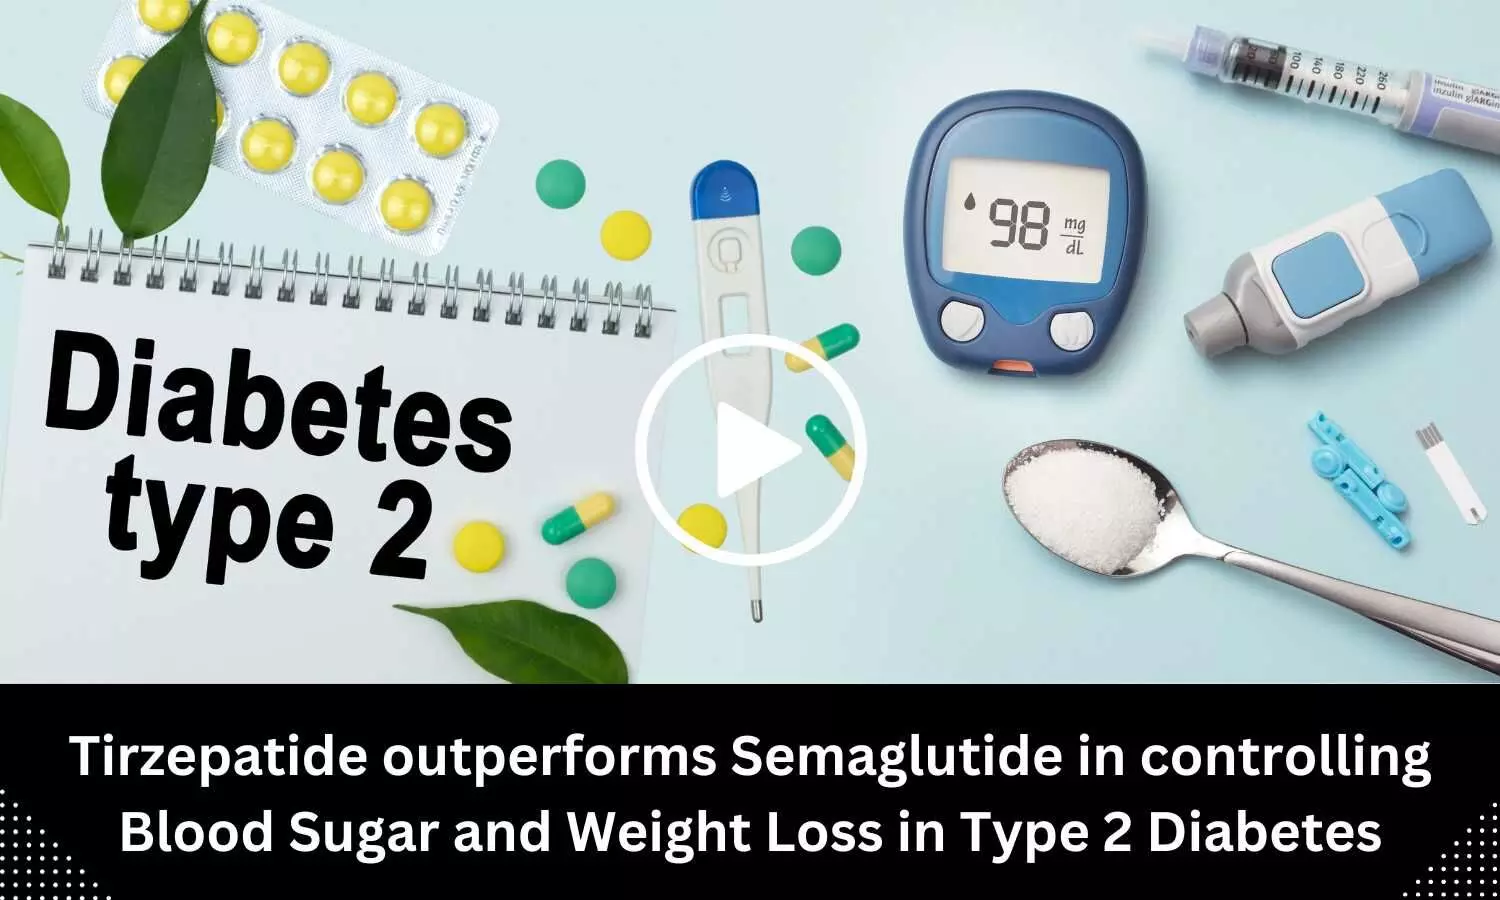 Tirzepatide outperforms Semaglutide in controlling Blood Sugar and Weight Loss in Type 2 Diabetes